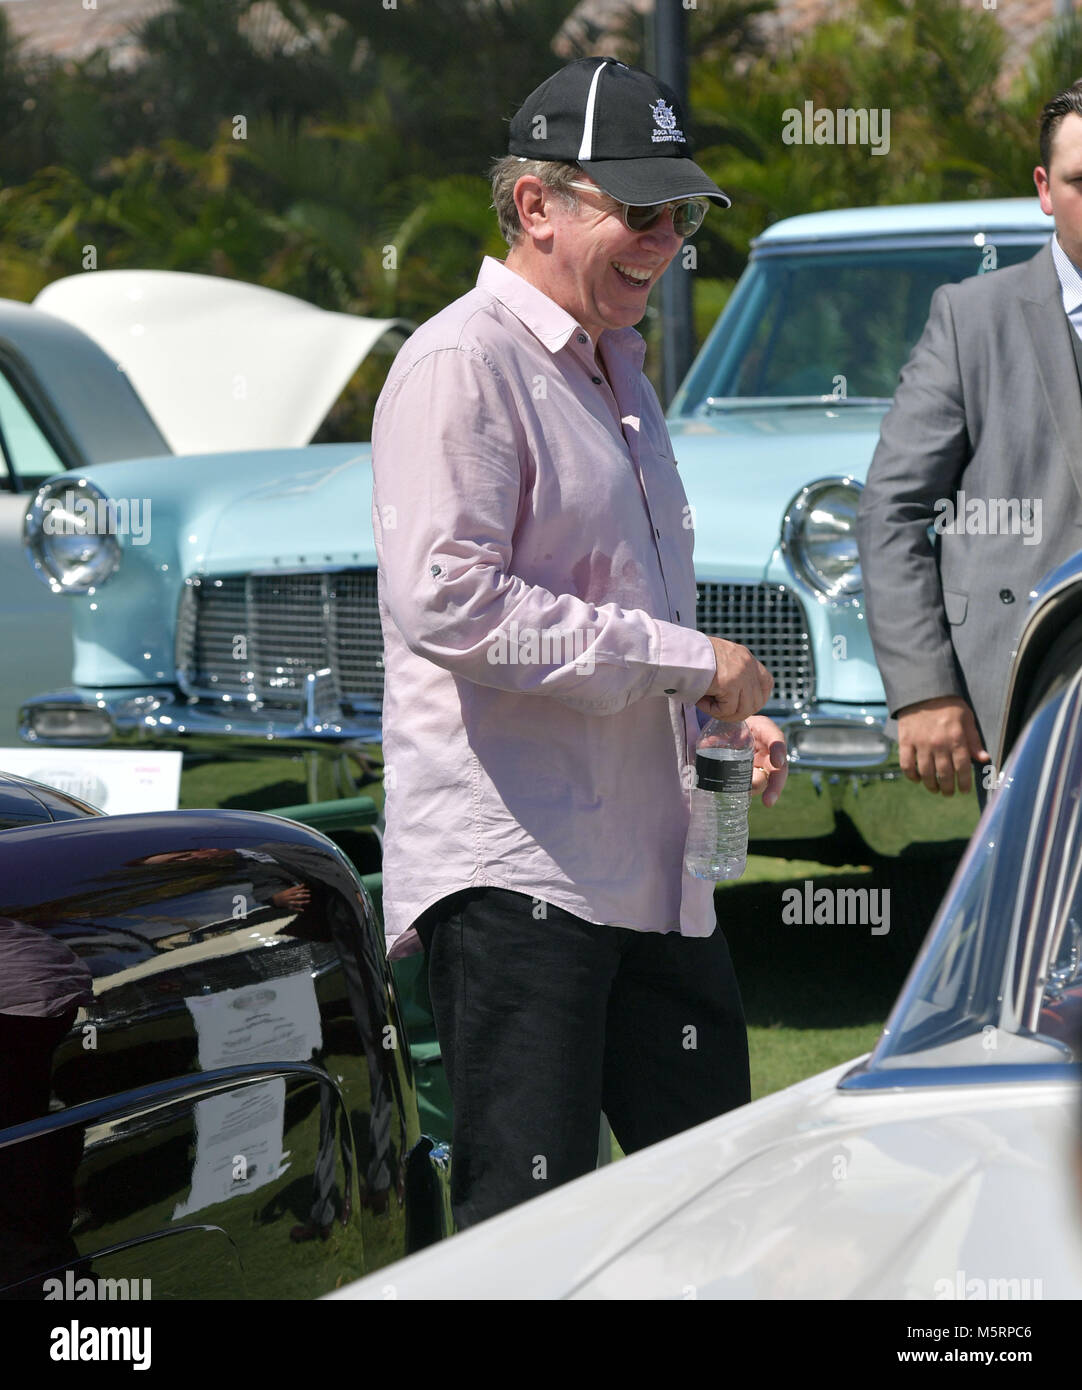 Boca Raton, FL, USA. 25th Feb, 2018. Jay Leno, Wayne Carini and actor Tim Allen judge and host 175 of the finest collector cars and motorcycles from around the country will gather on the show field at the famed Boca Raton Resort & Club: Credit: Hoo Me.Com/Media Punch **No Ny Dallies****/Alamy Live News Stock Photo